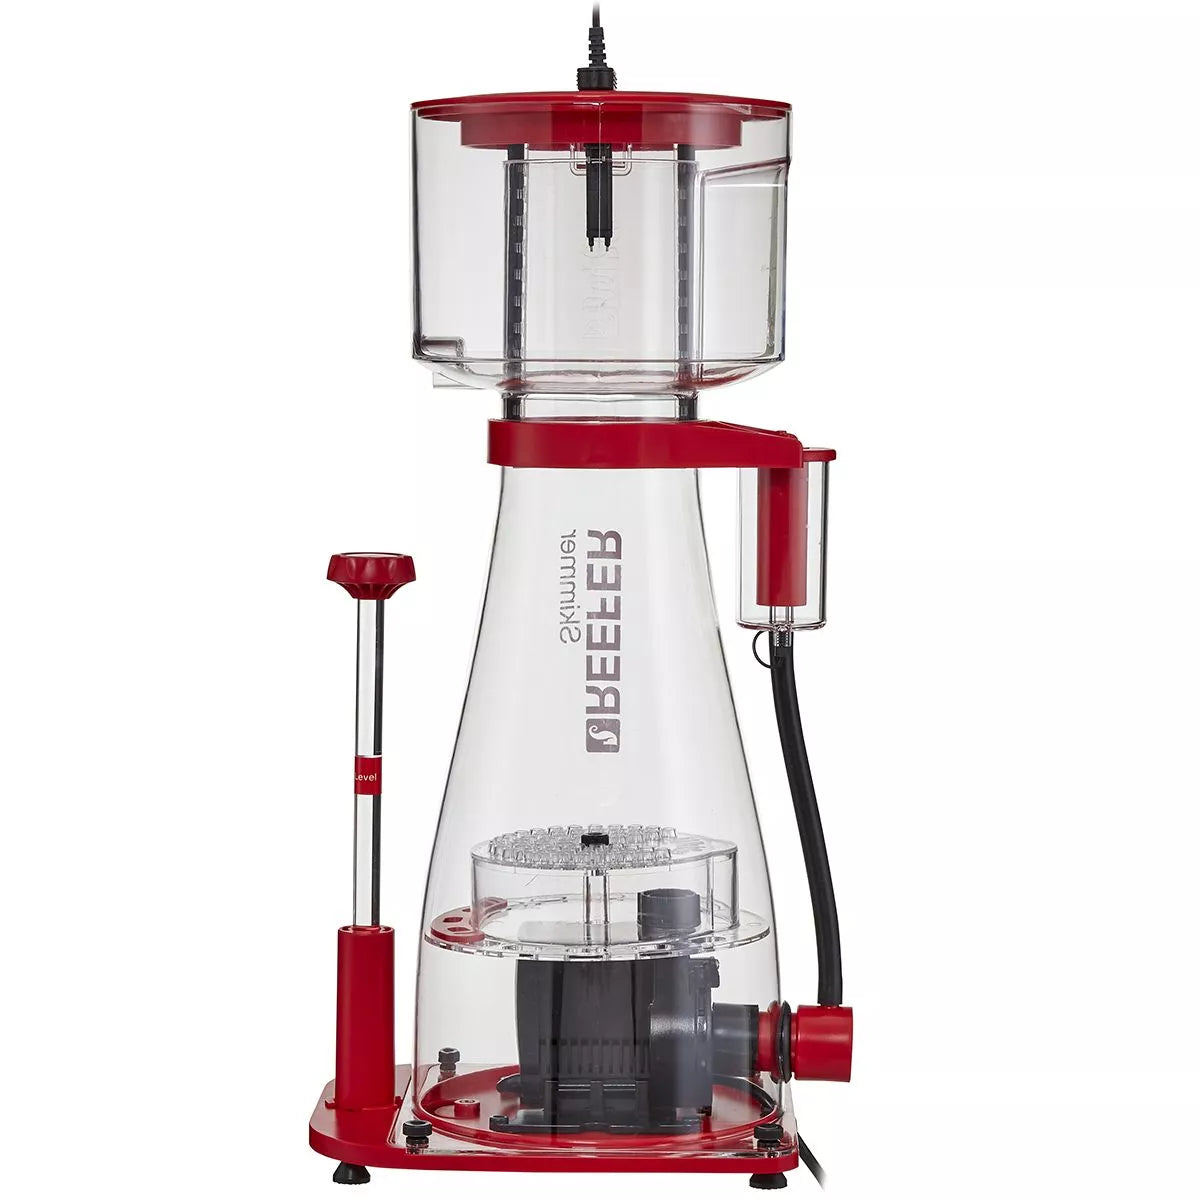 Reefer DC 300 Protein Skimmer - Red Sea